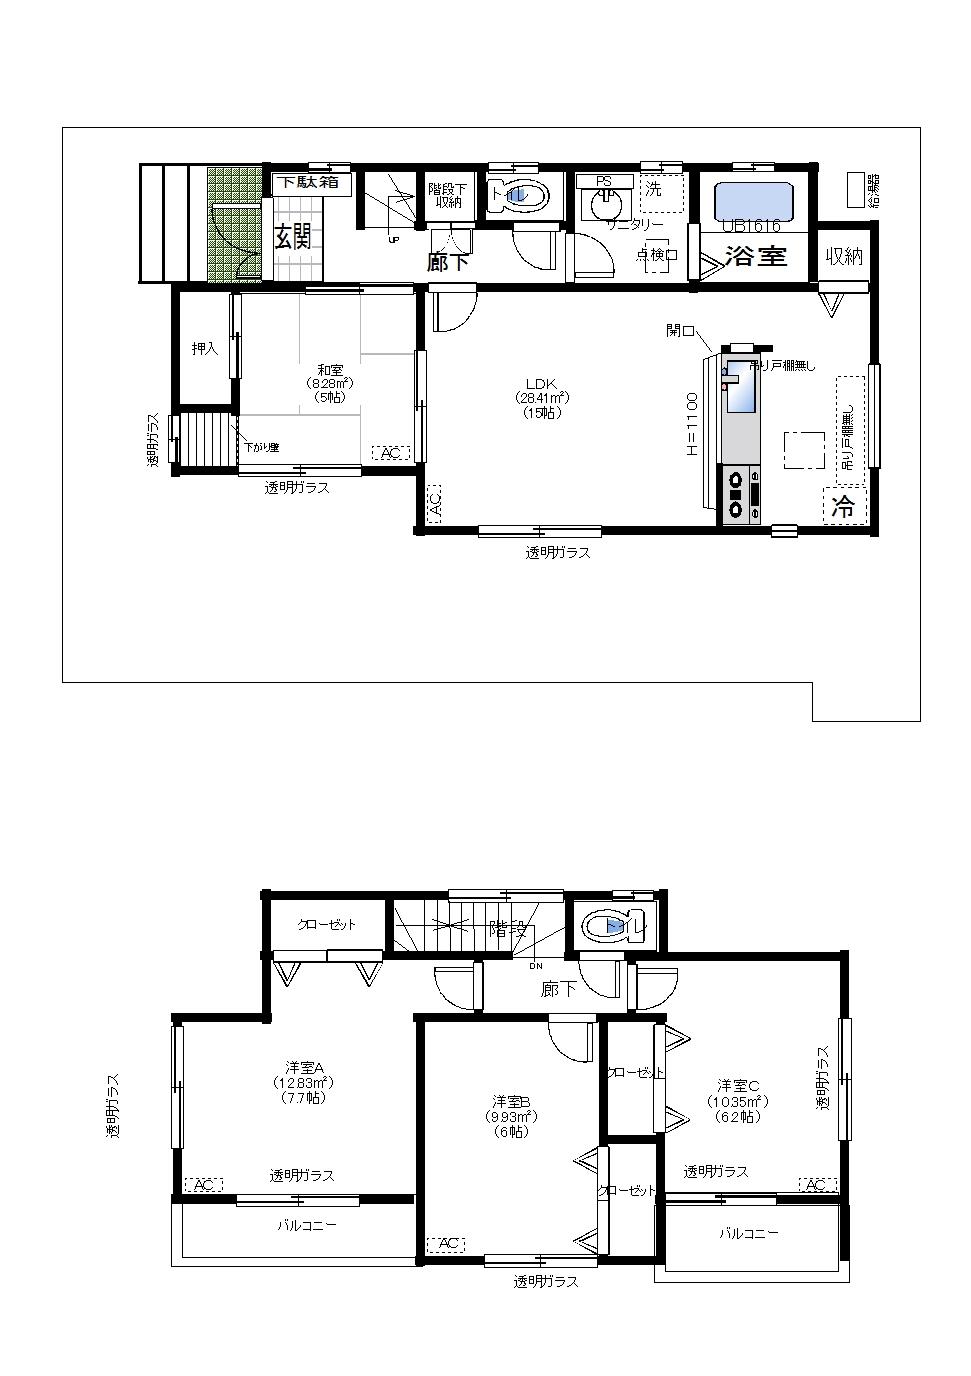 Floor plan. 32,800,000 yen, 4LDK, Land area 100.35 sq m , Building area 94.39 sq m 4LDK Zenshitsuminami direction South side also has some contact road